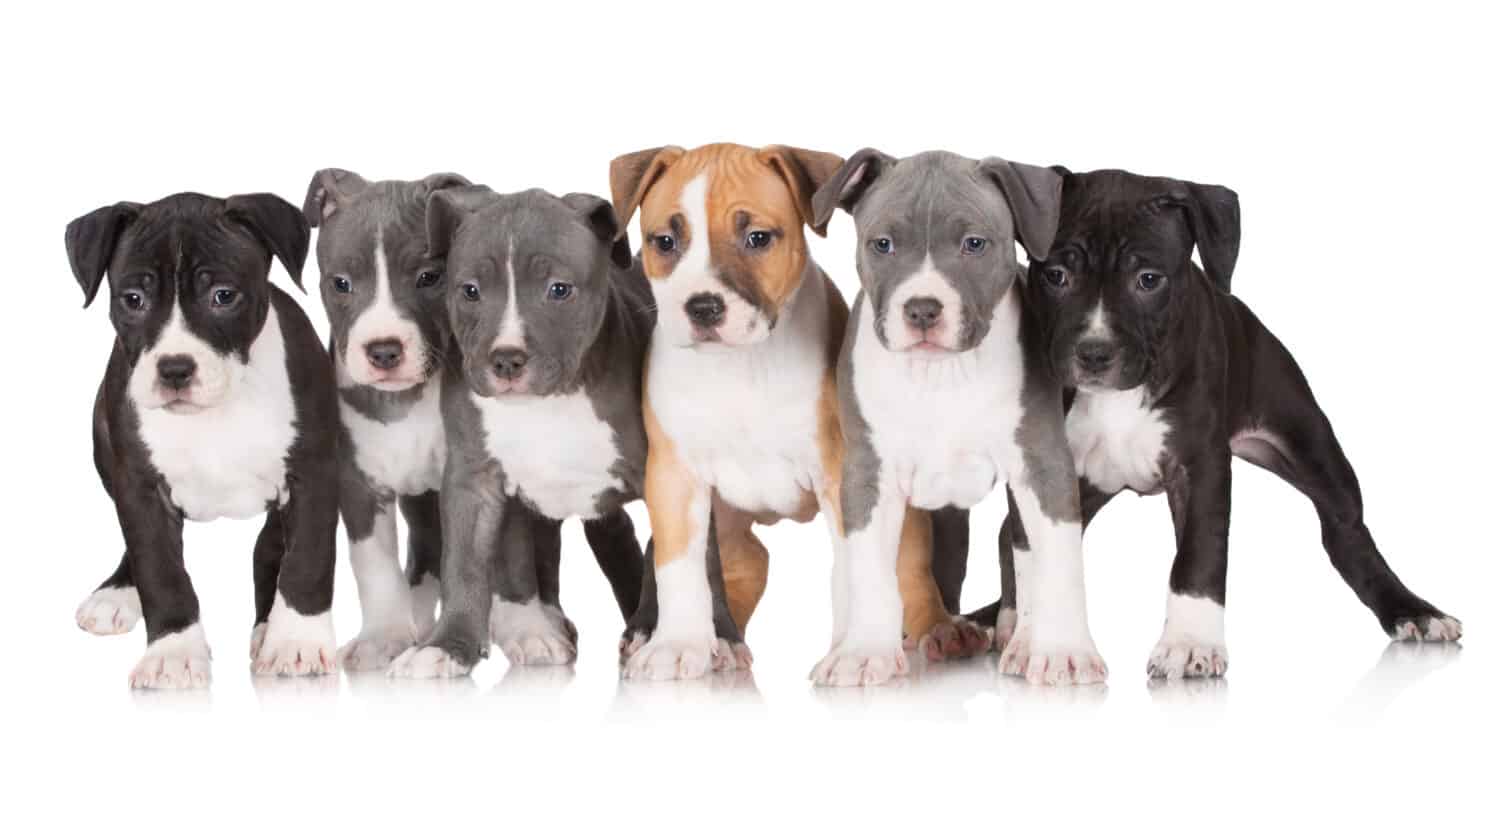 six staffordshire terrier puppies together